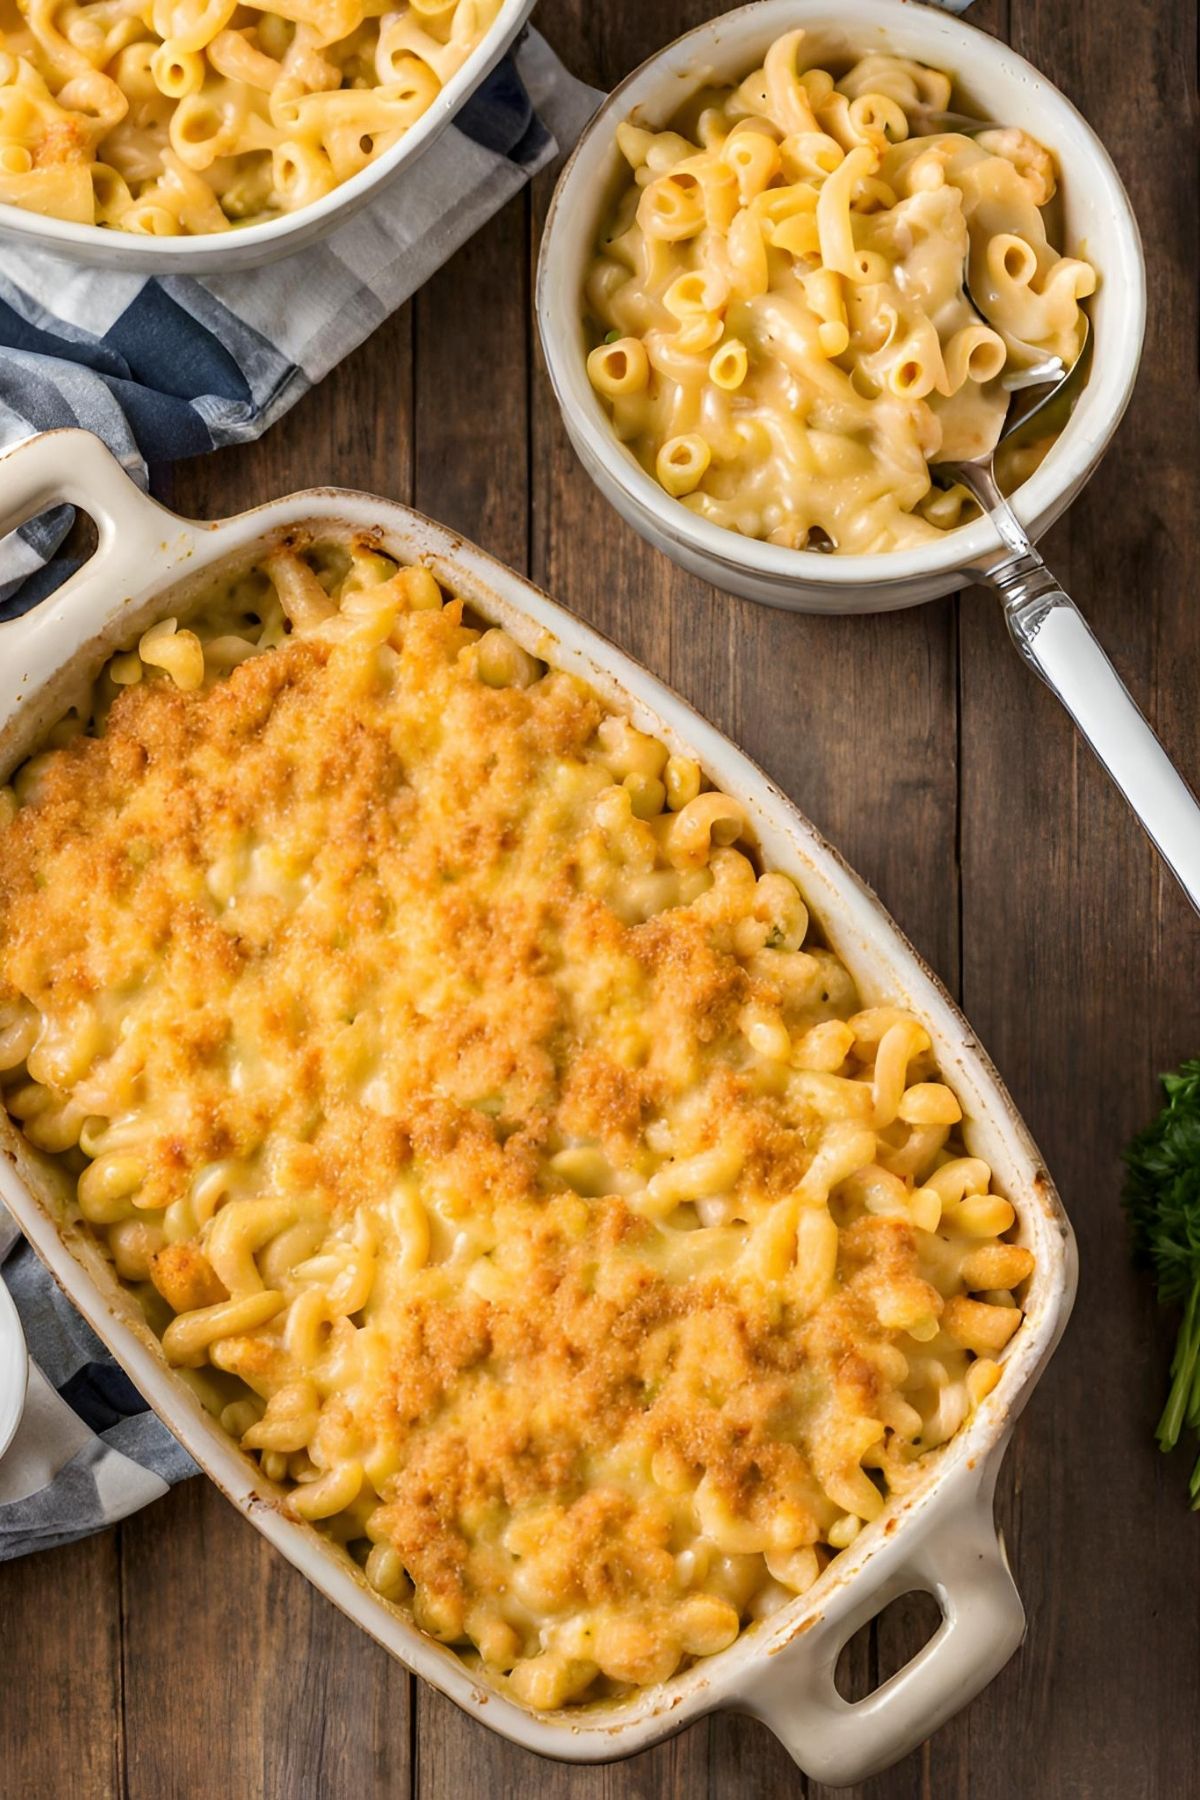 full casserole dish of macaroni and cheese with an individual serving